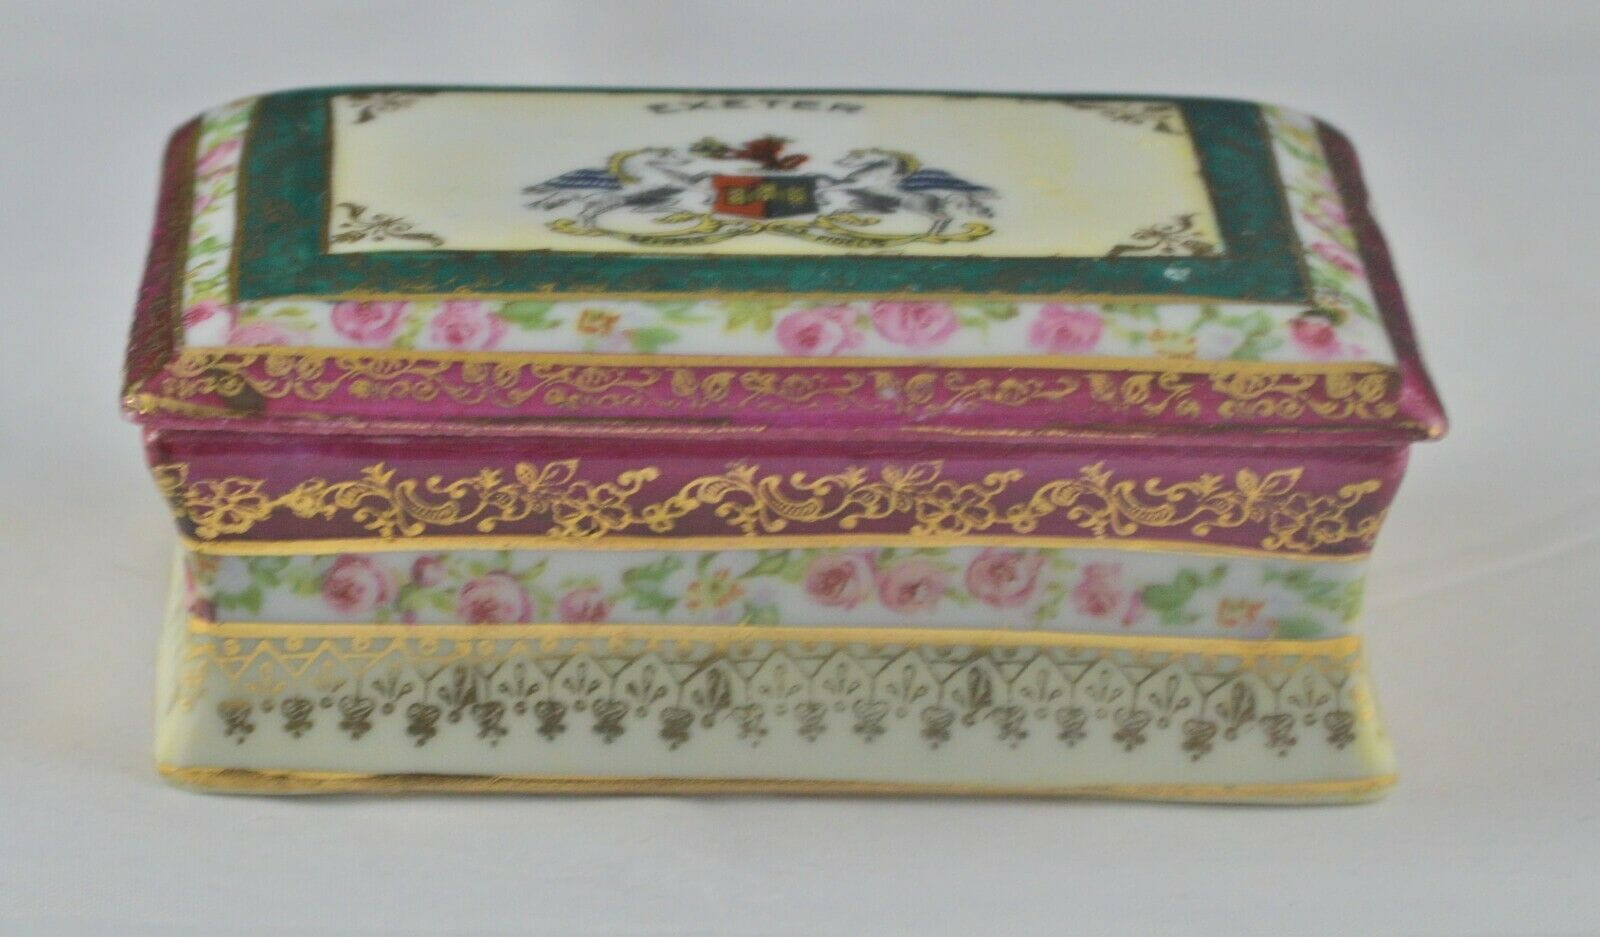 TRINKET BOX EXETER(PREVIOUSLY OWNED) GOOD CONDITION - TMD167207